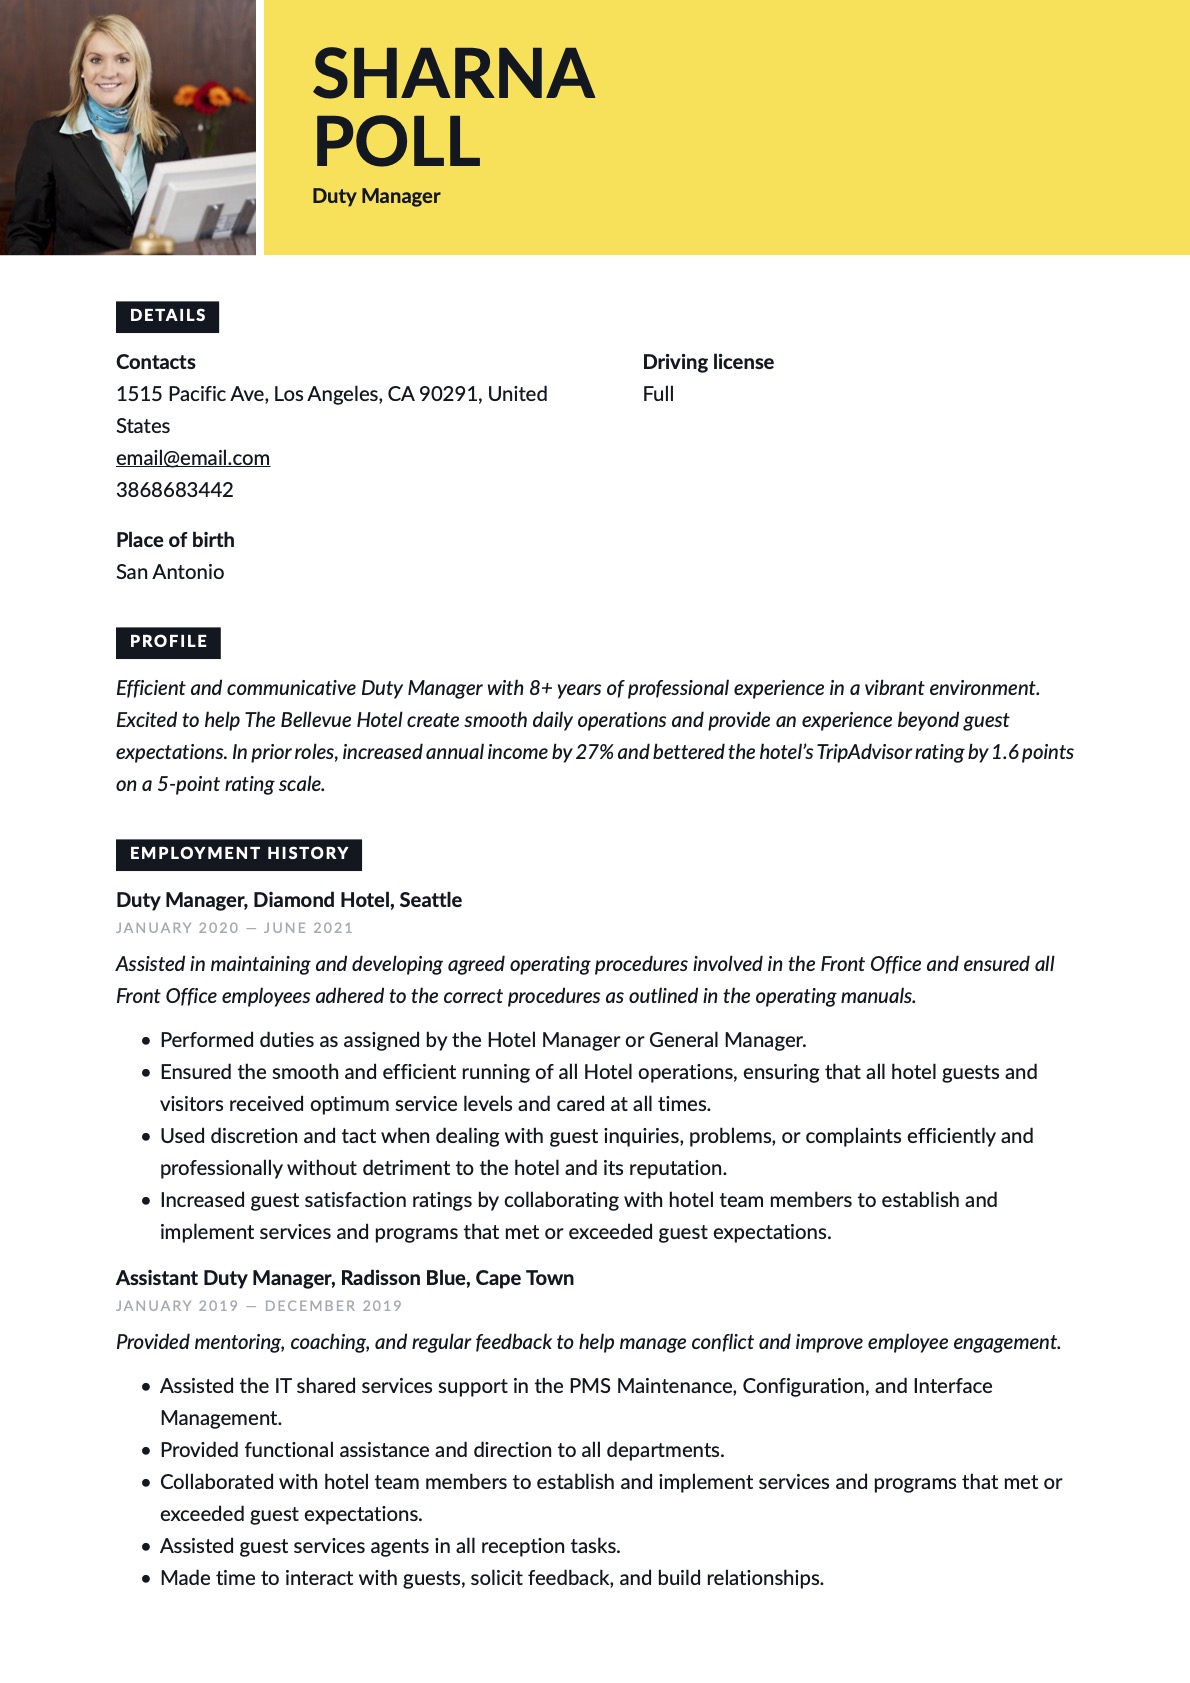 Duty Manager Resume